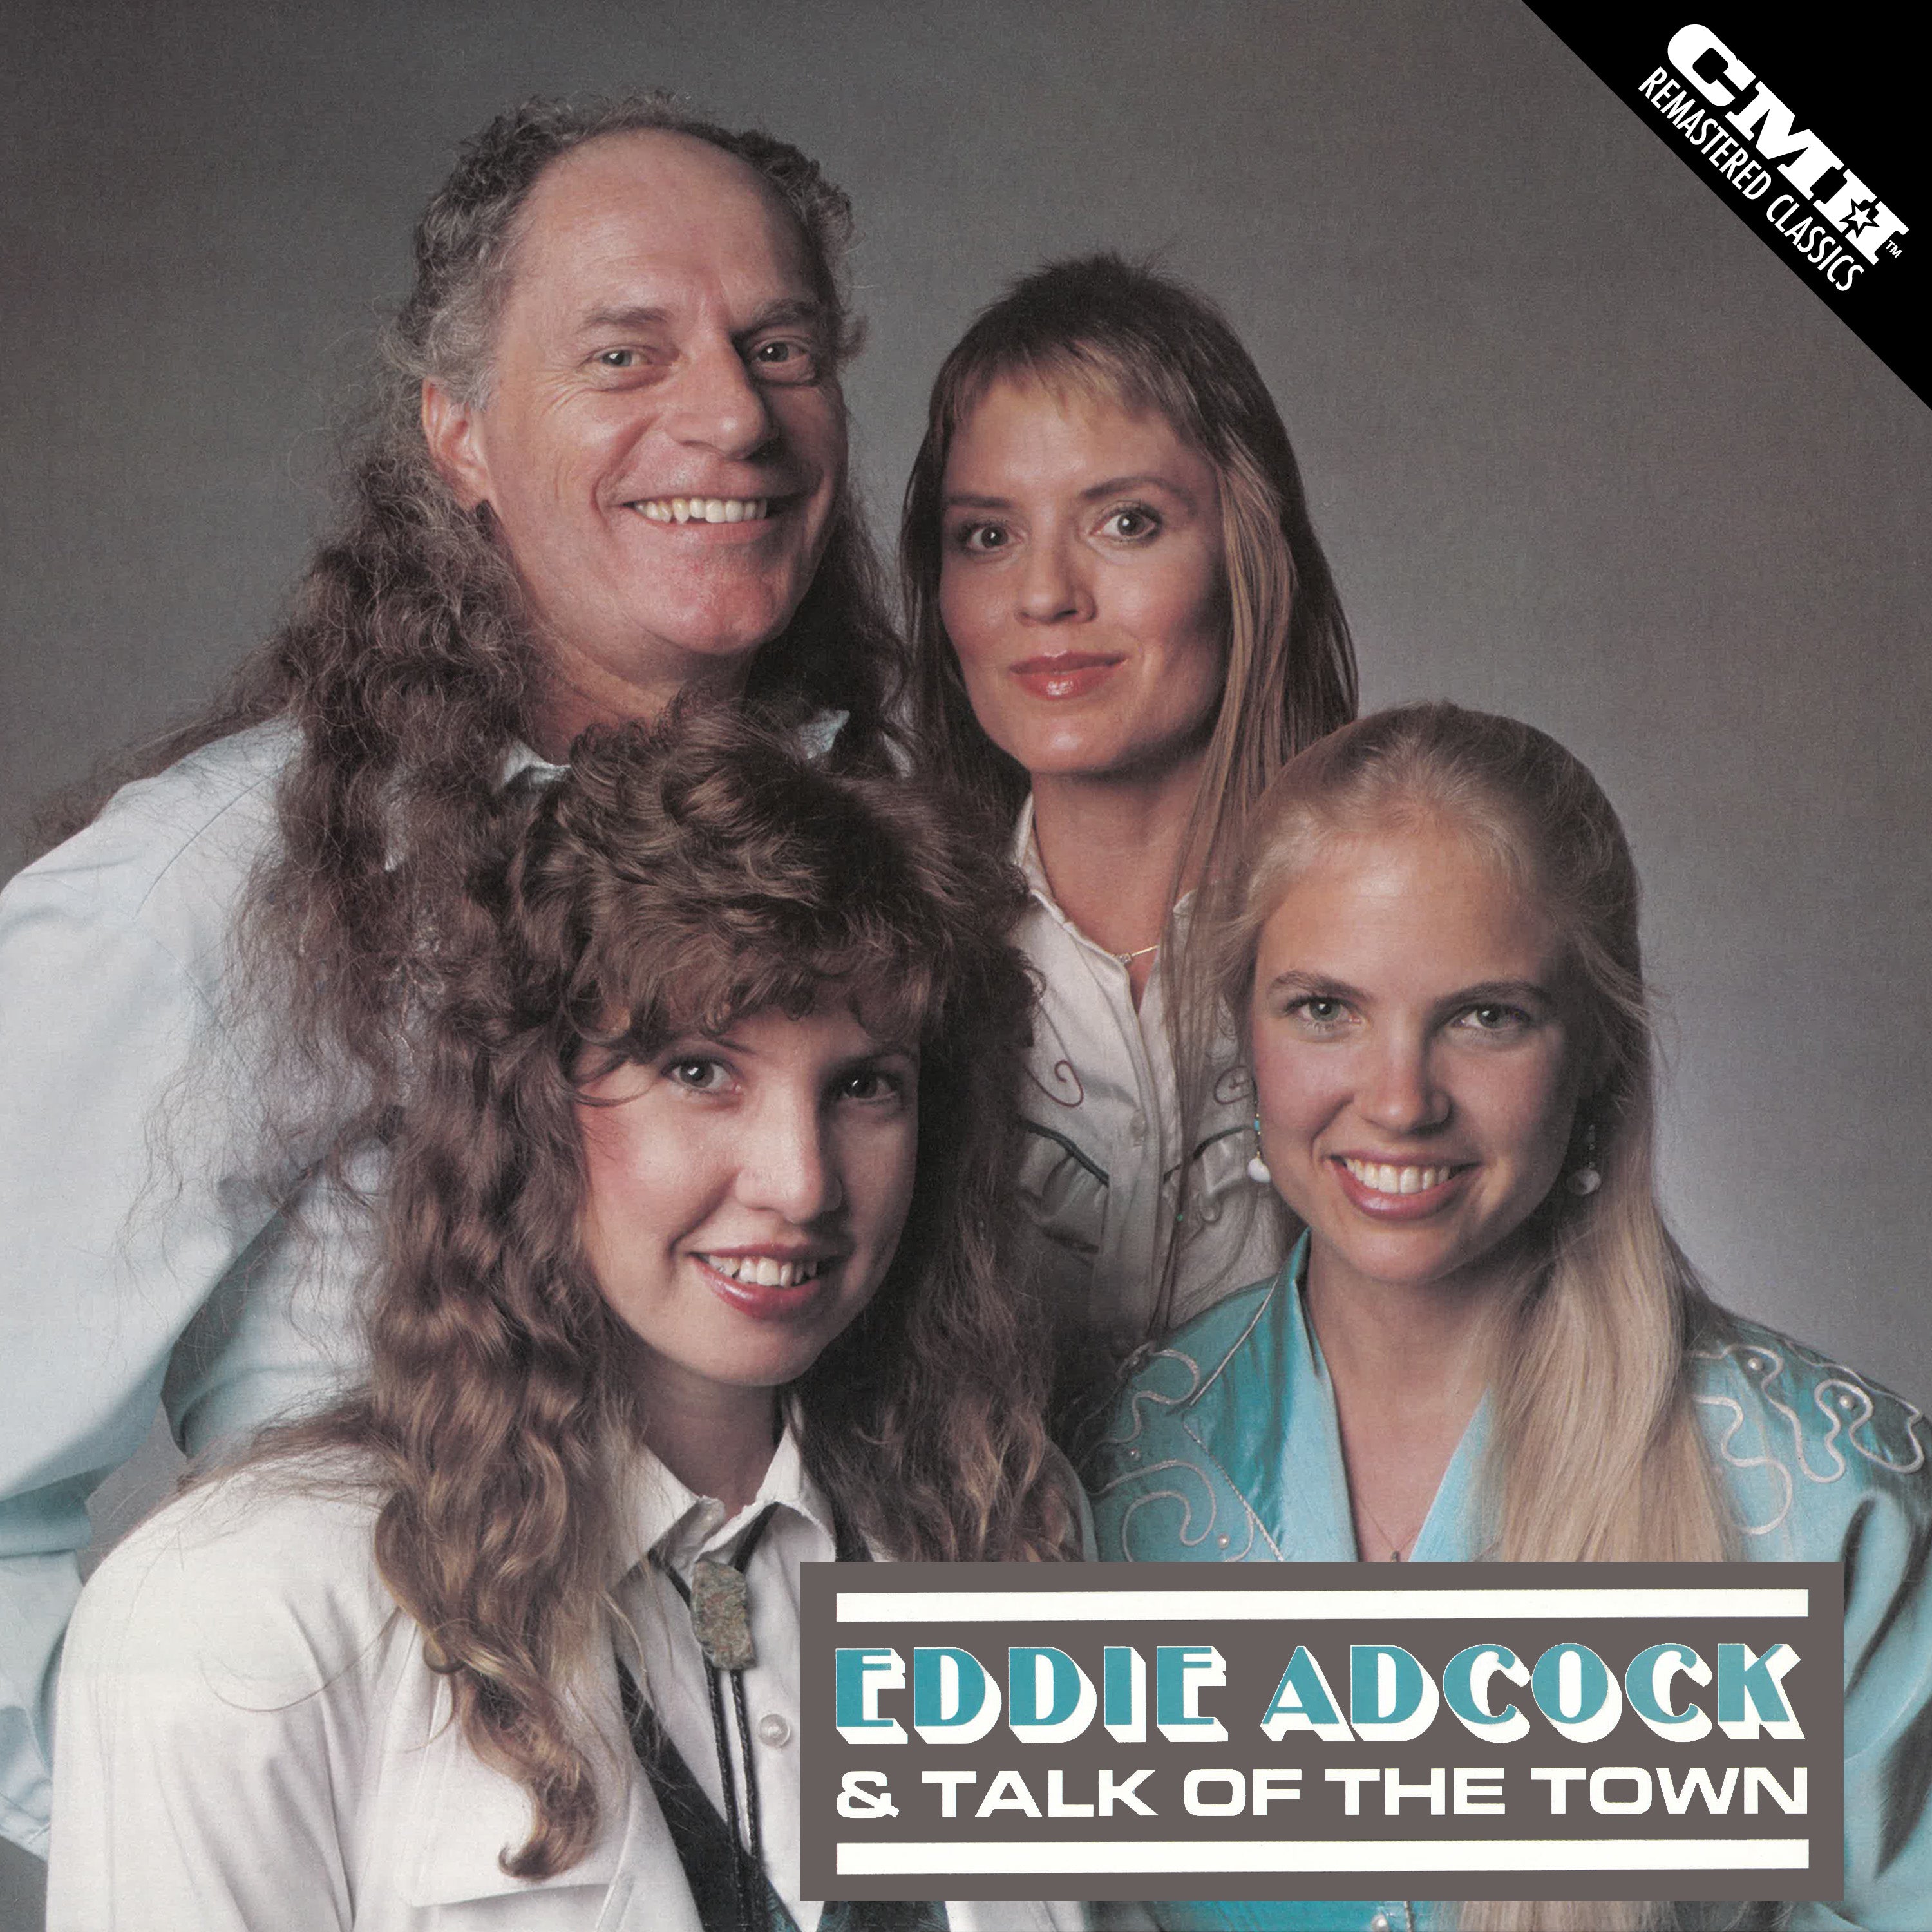 Eddie Adcock & Talk of the Town - MP3